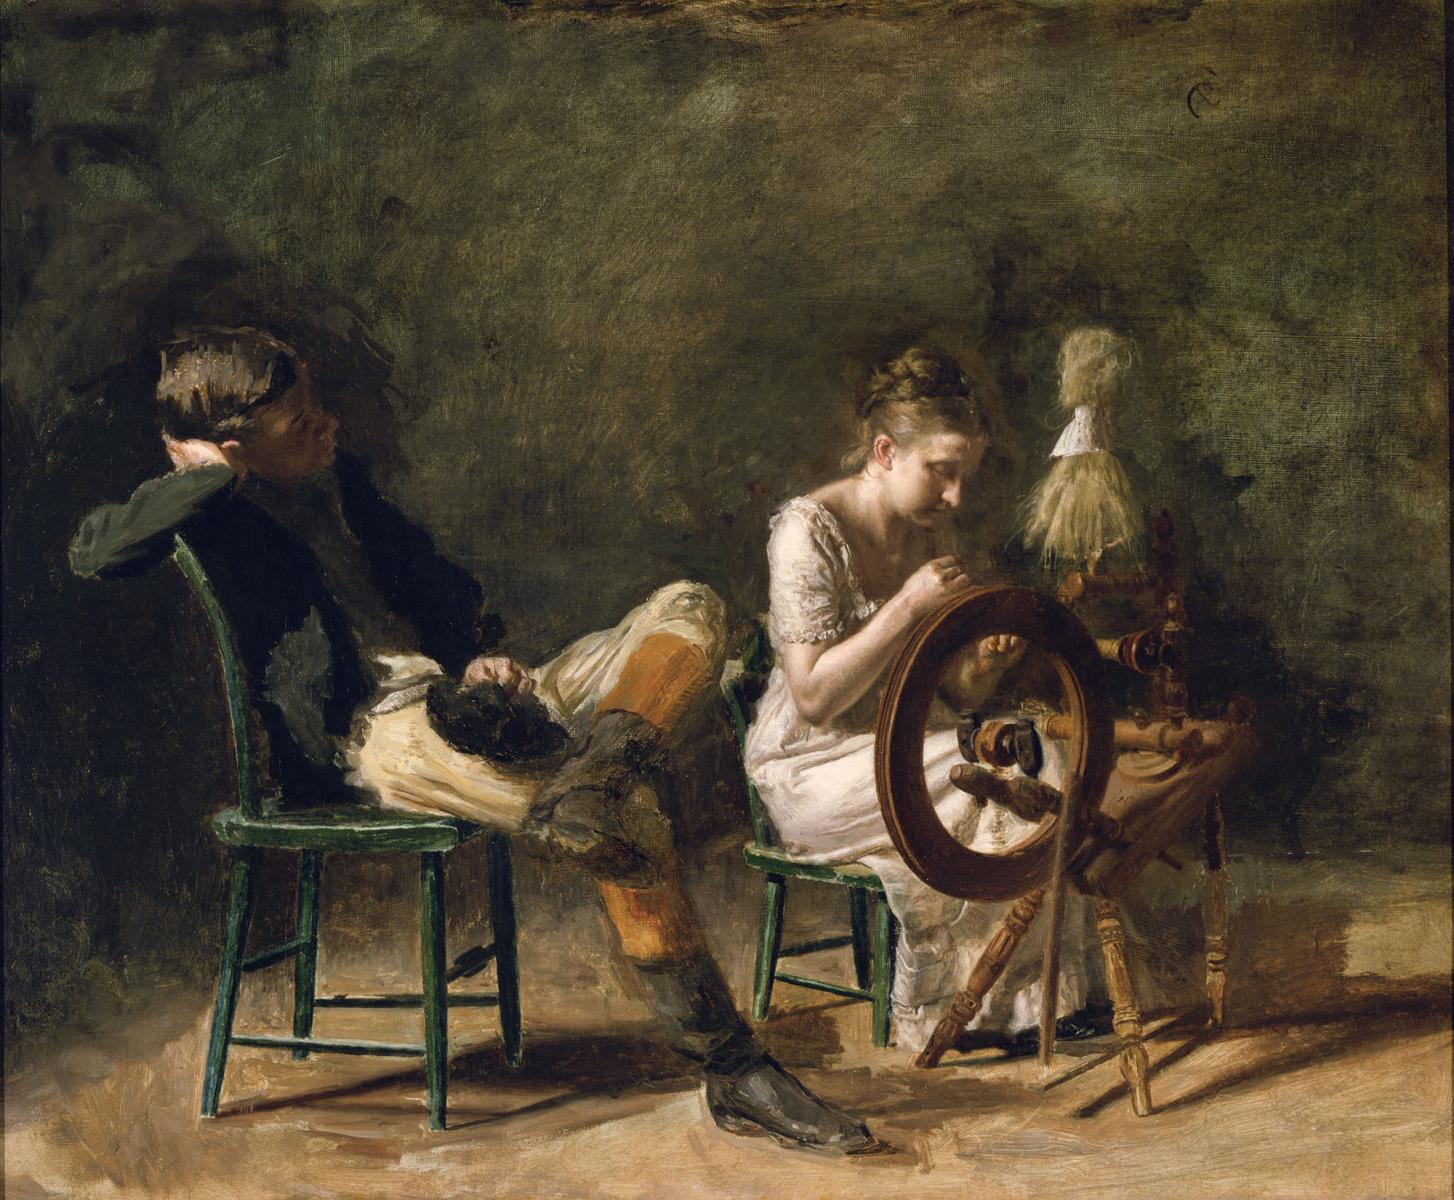 The Courtship by Thomas Eakins